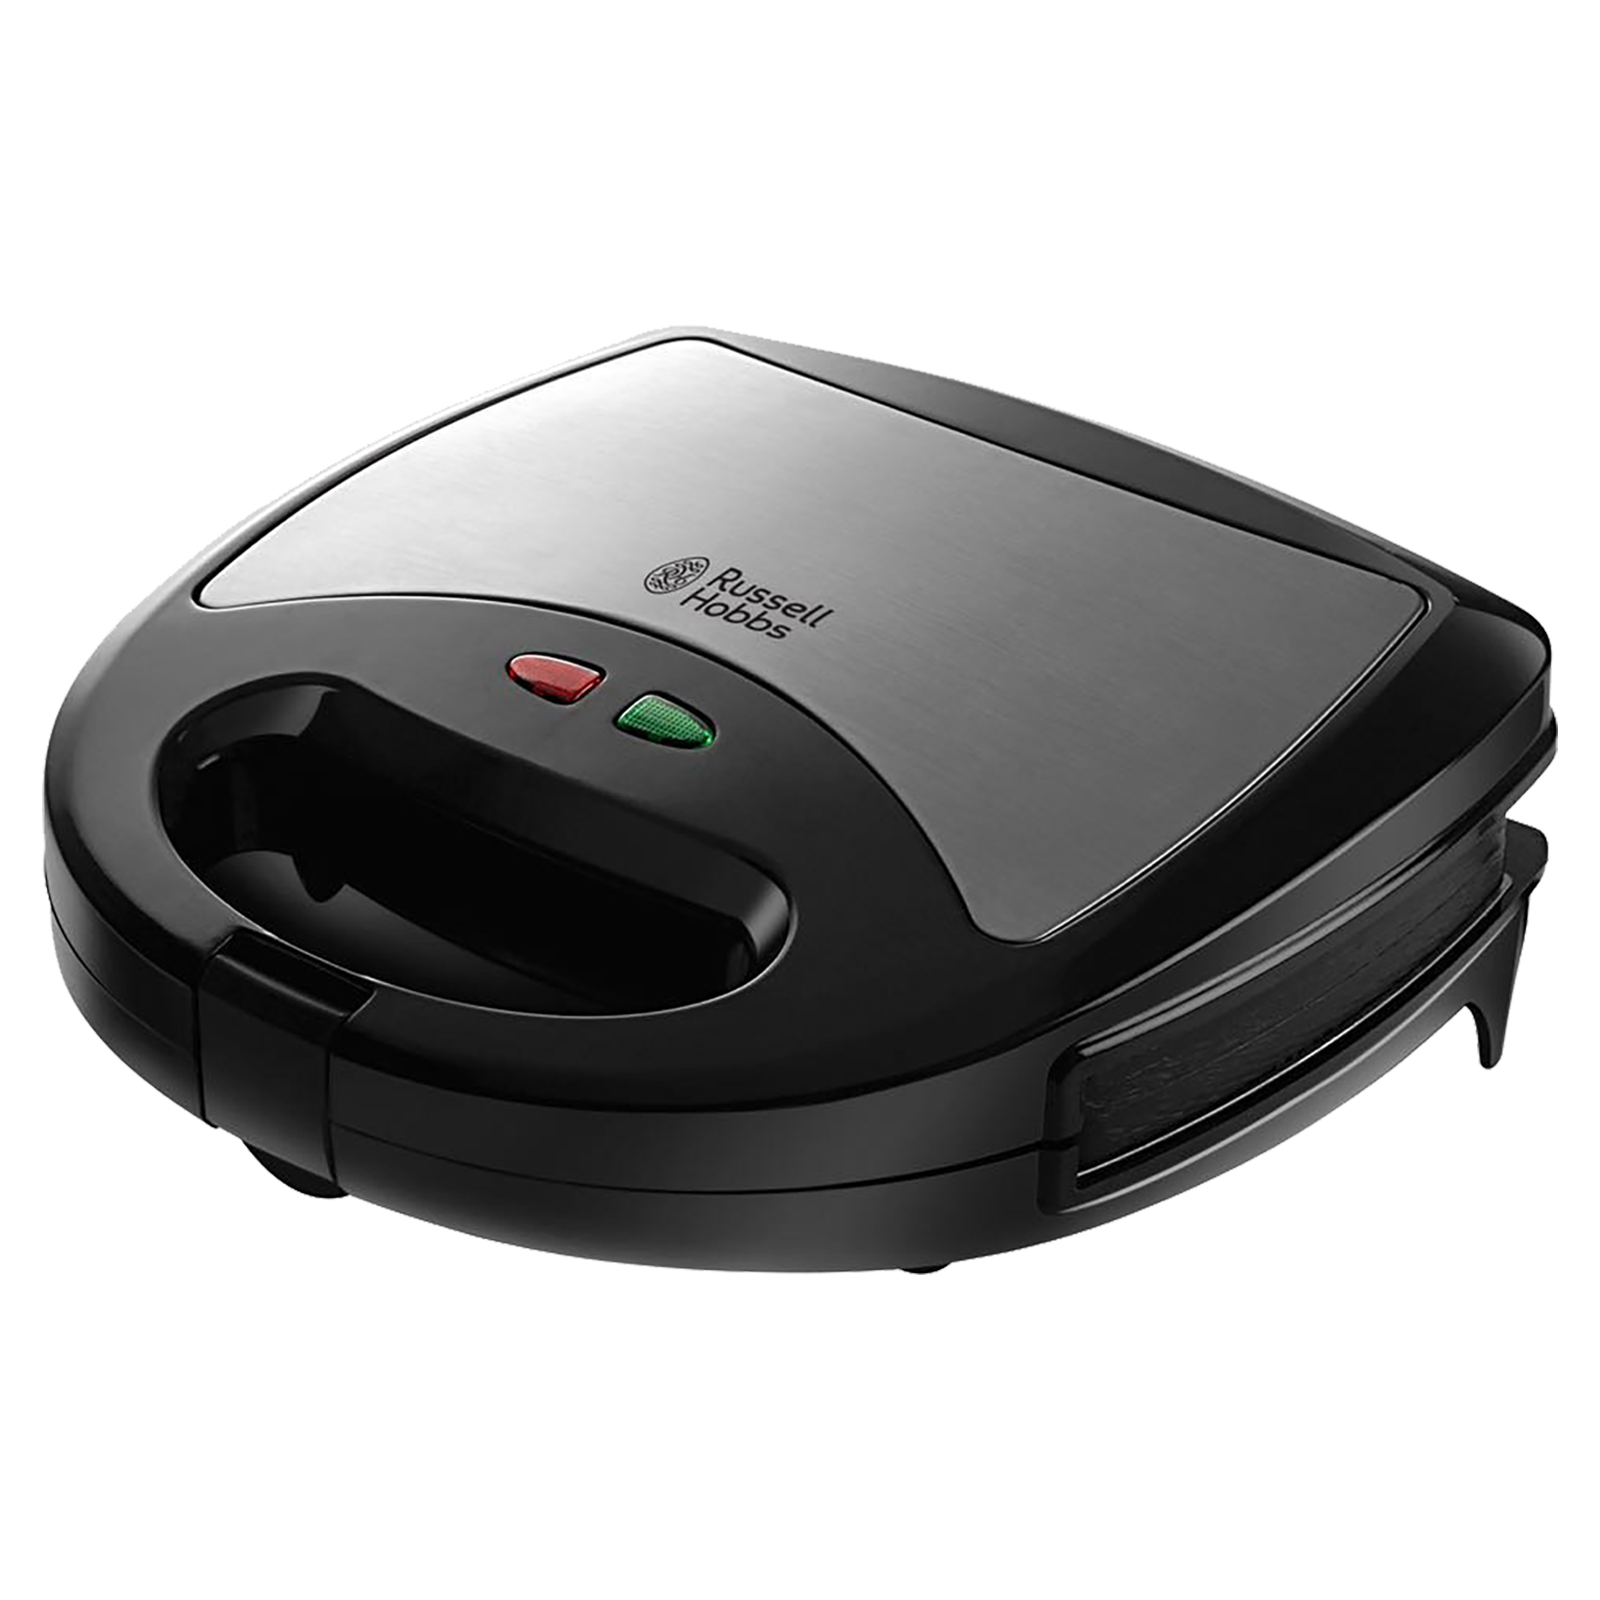 Russell Hobbs - Russell Hobbs 750 Watts 2 Slice Automatic Grill+Toast Sandwich Maker (Thermostat Control, RST750M2S, Black)